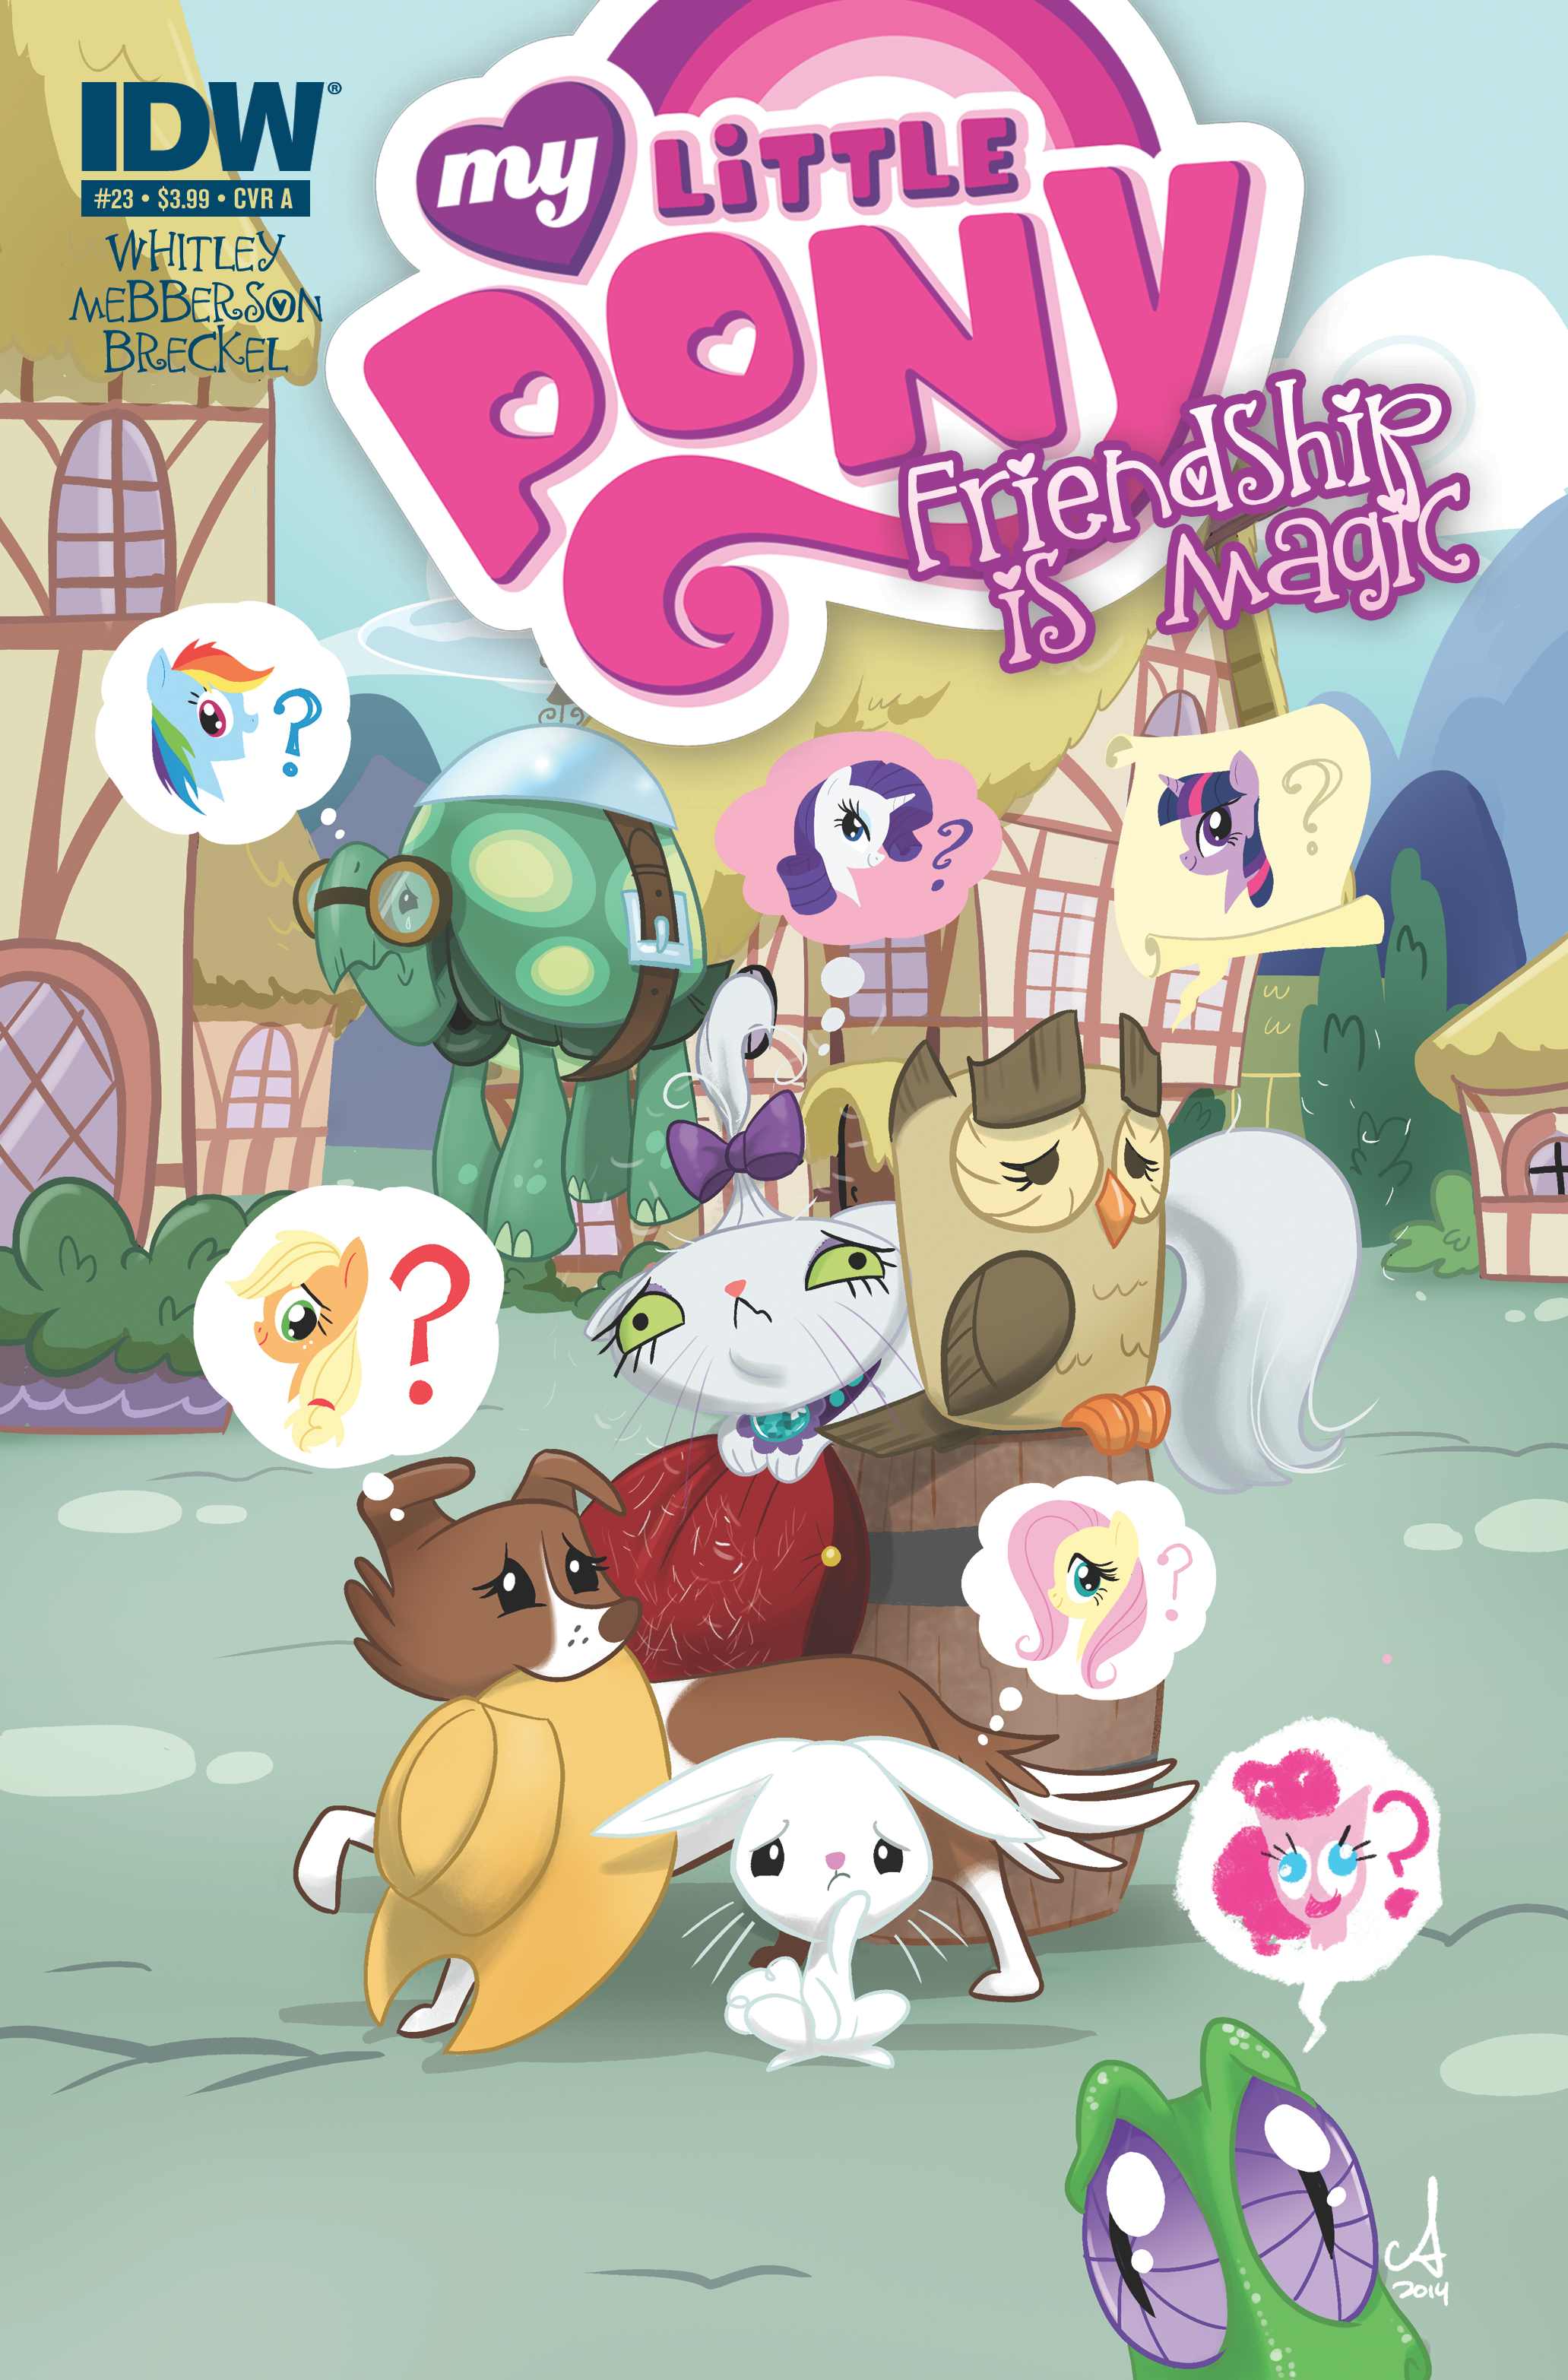 Friendship Is Magic Issue 23 My Little Pony Friendship Is Magic